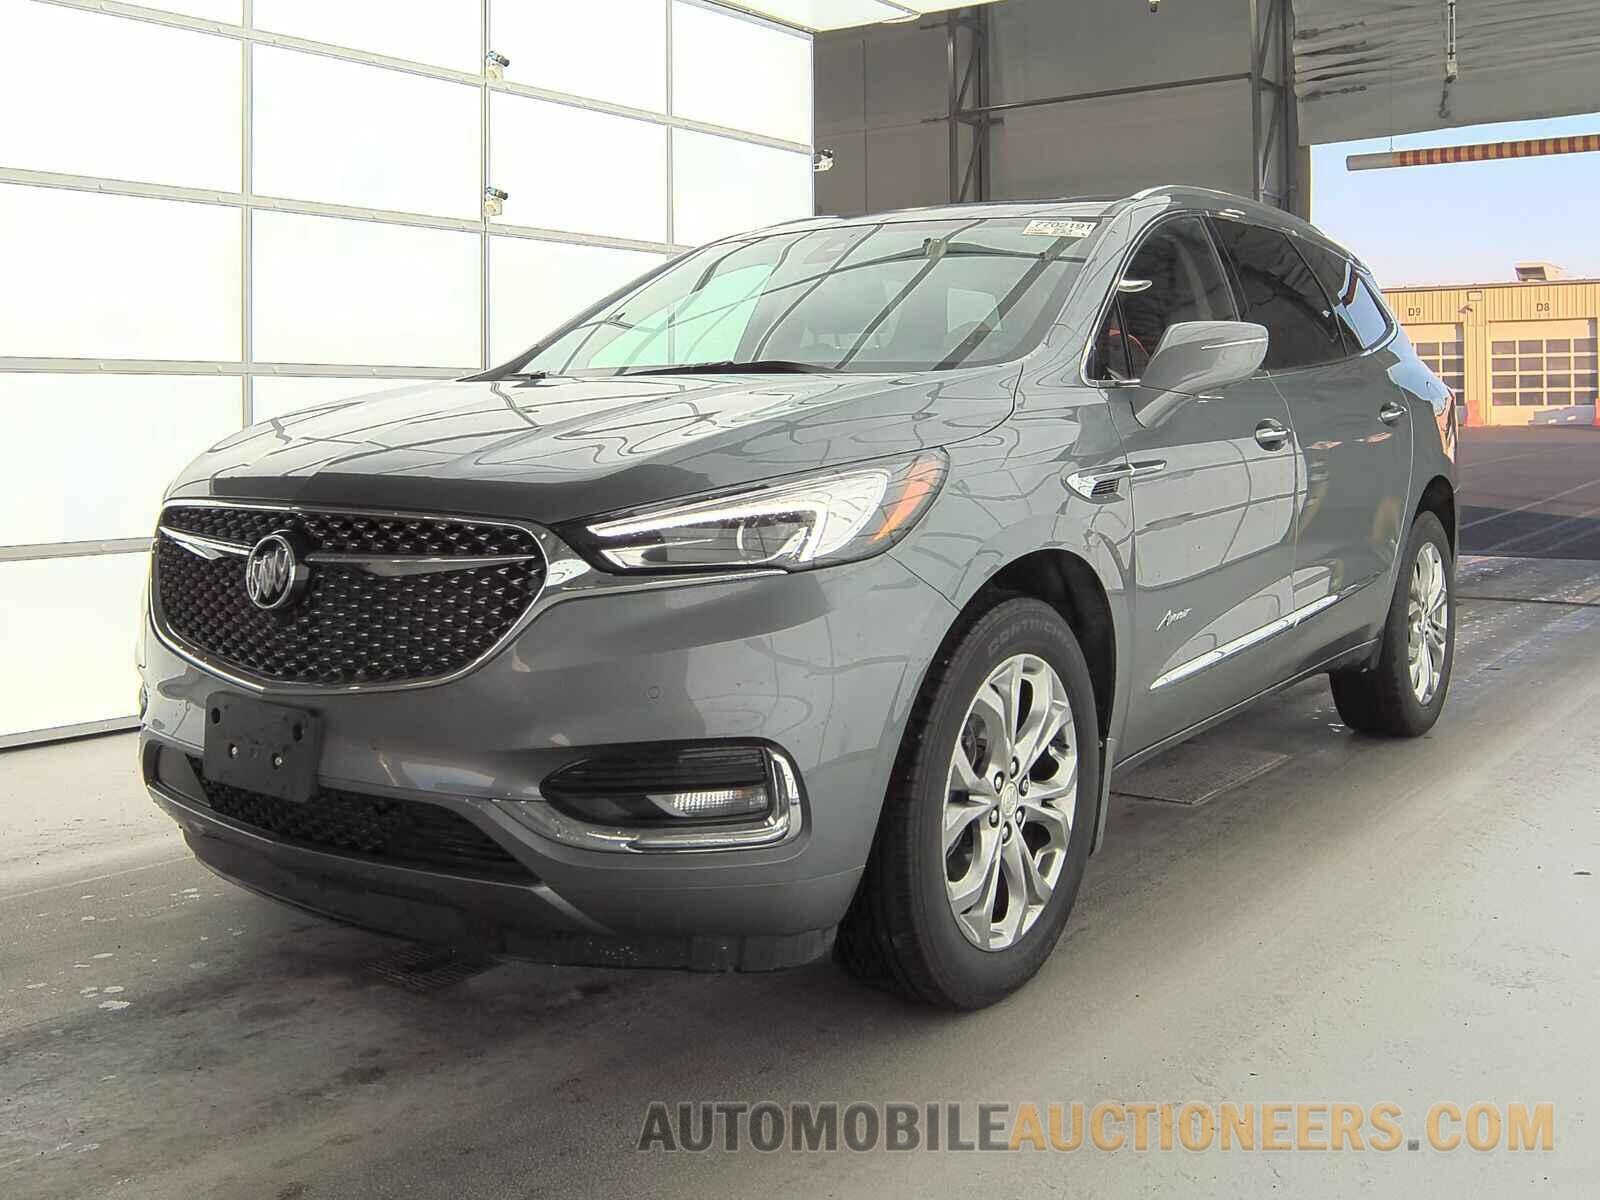 5GAEVCKW8MJ148599 Buick Enclave 2021